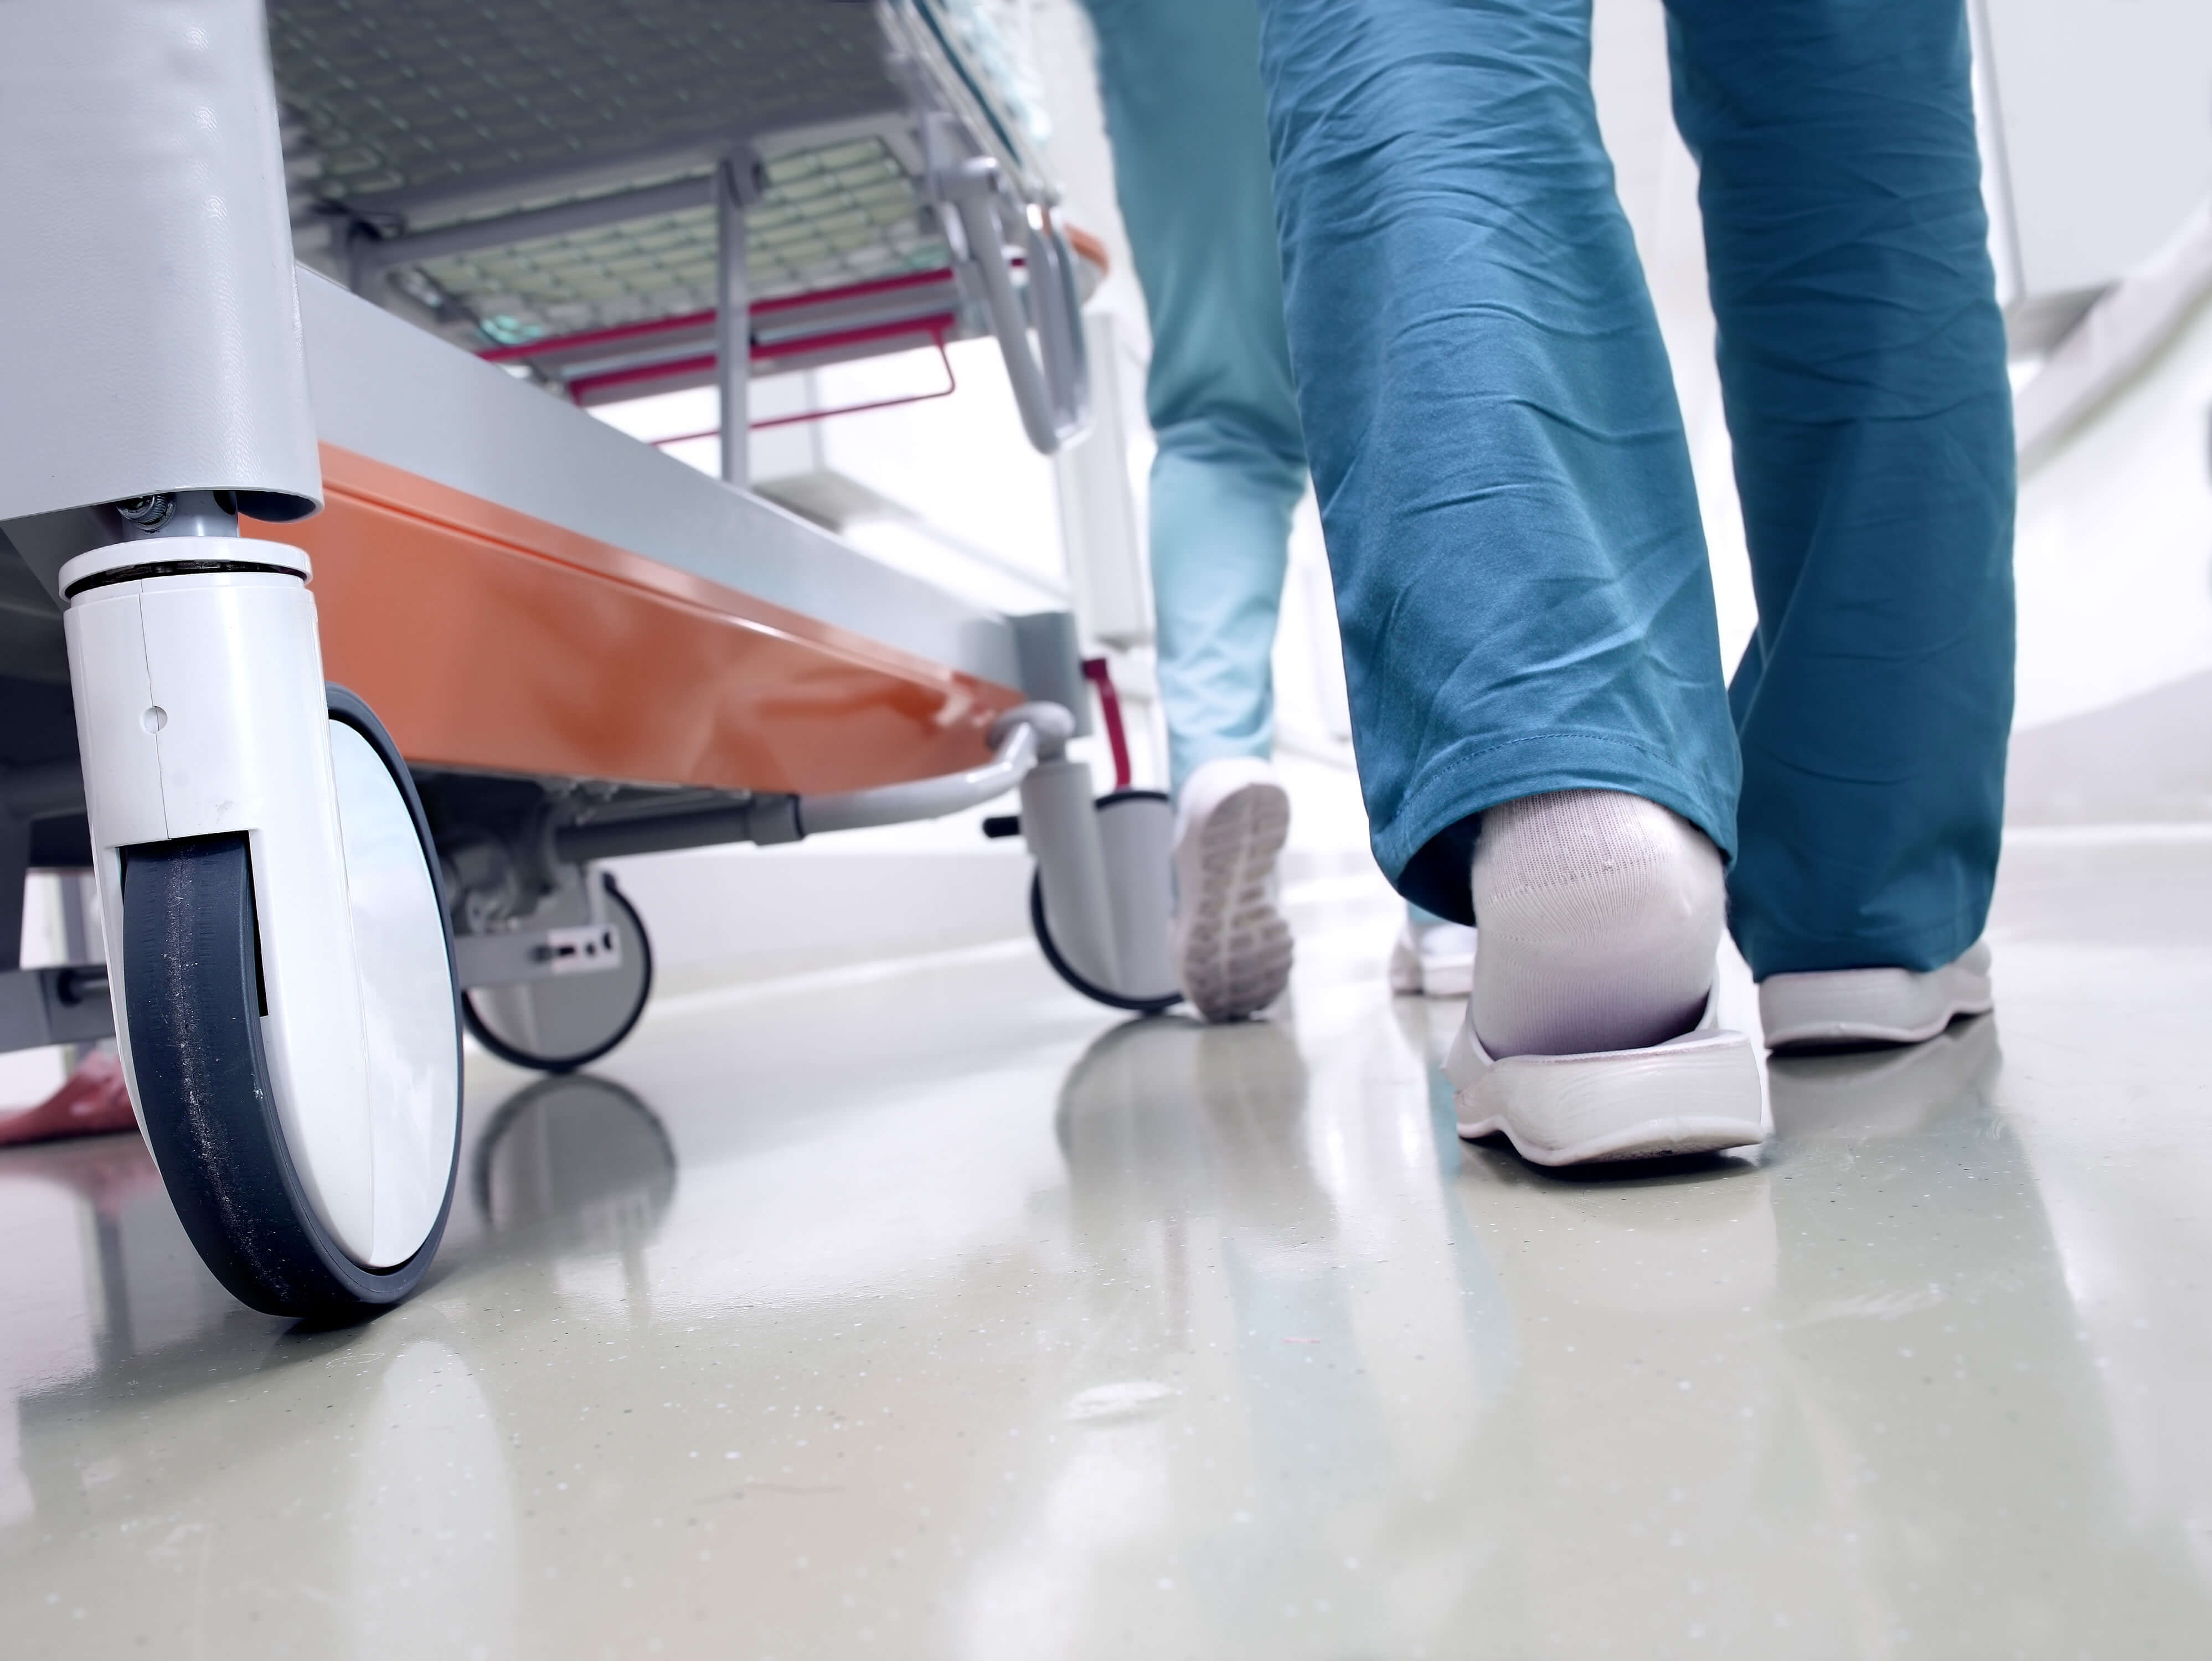 A patient trolley being pushed by a member of staff through a hospital